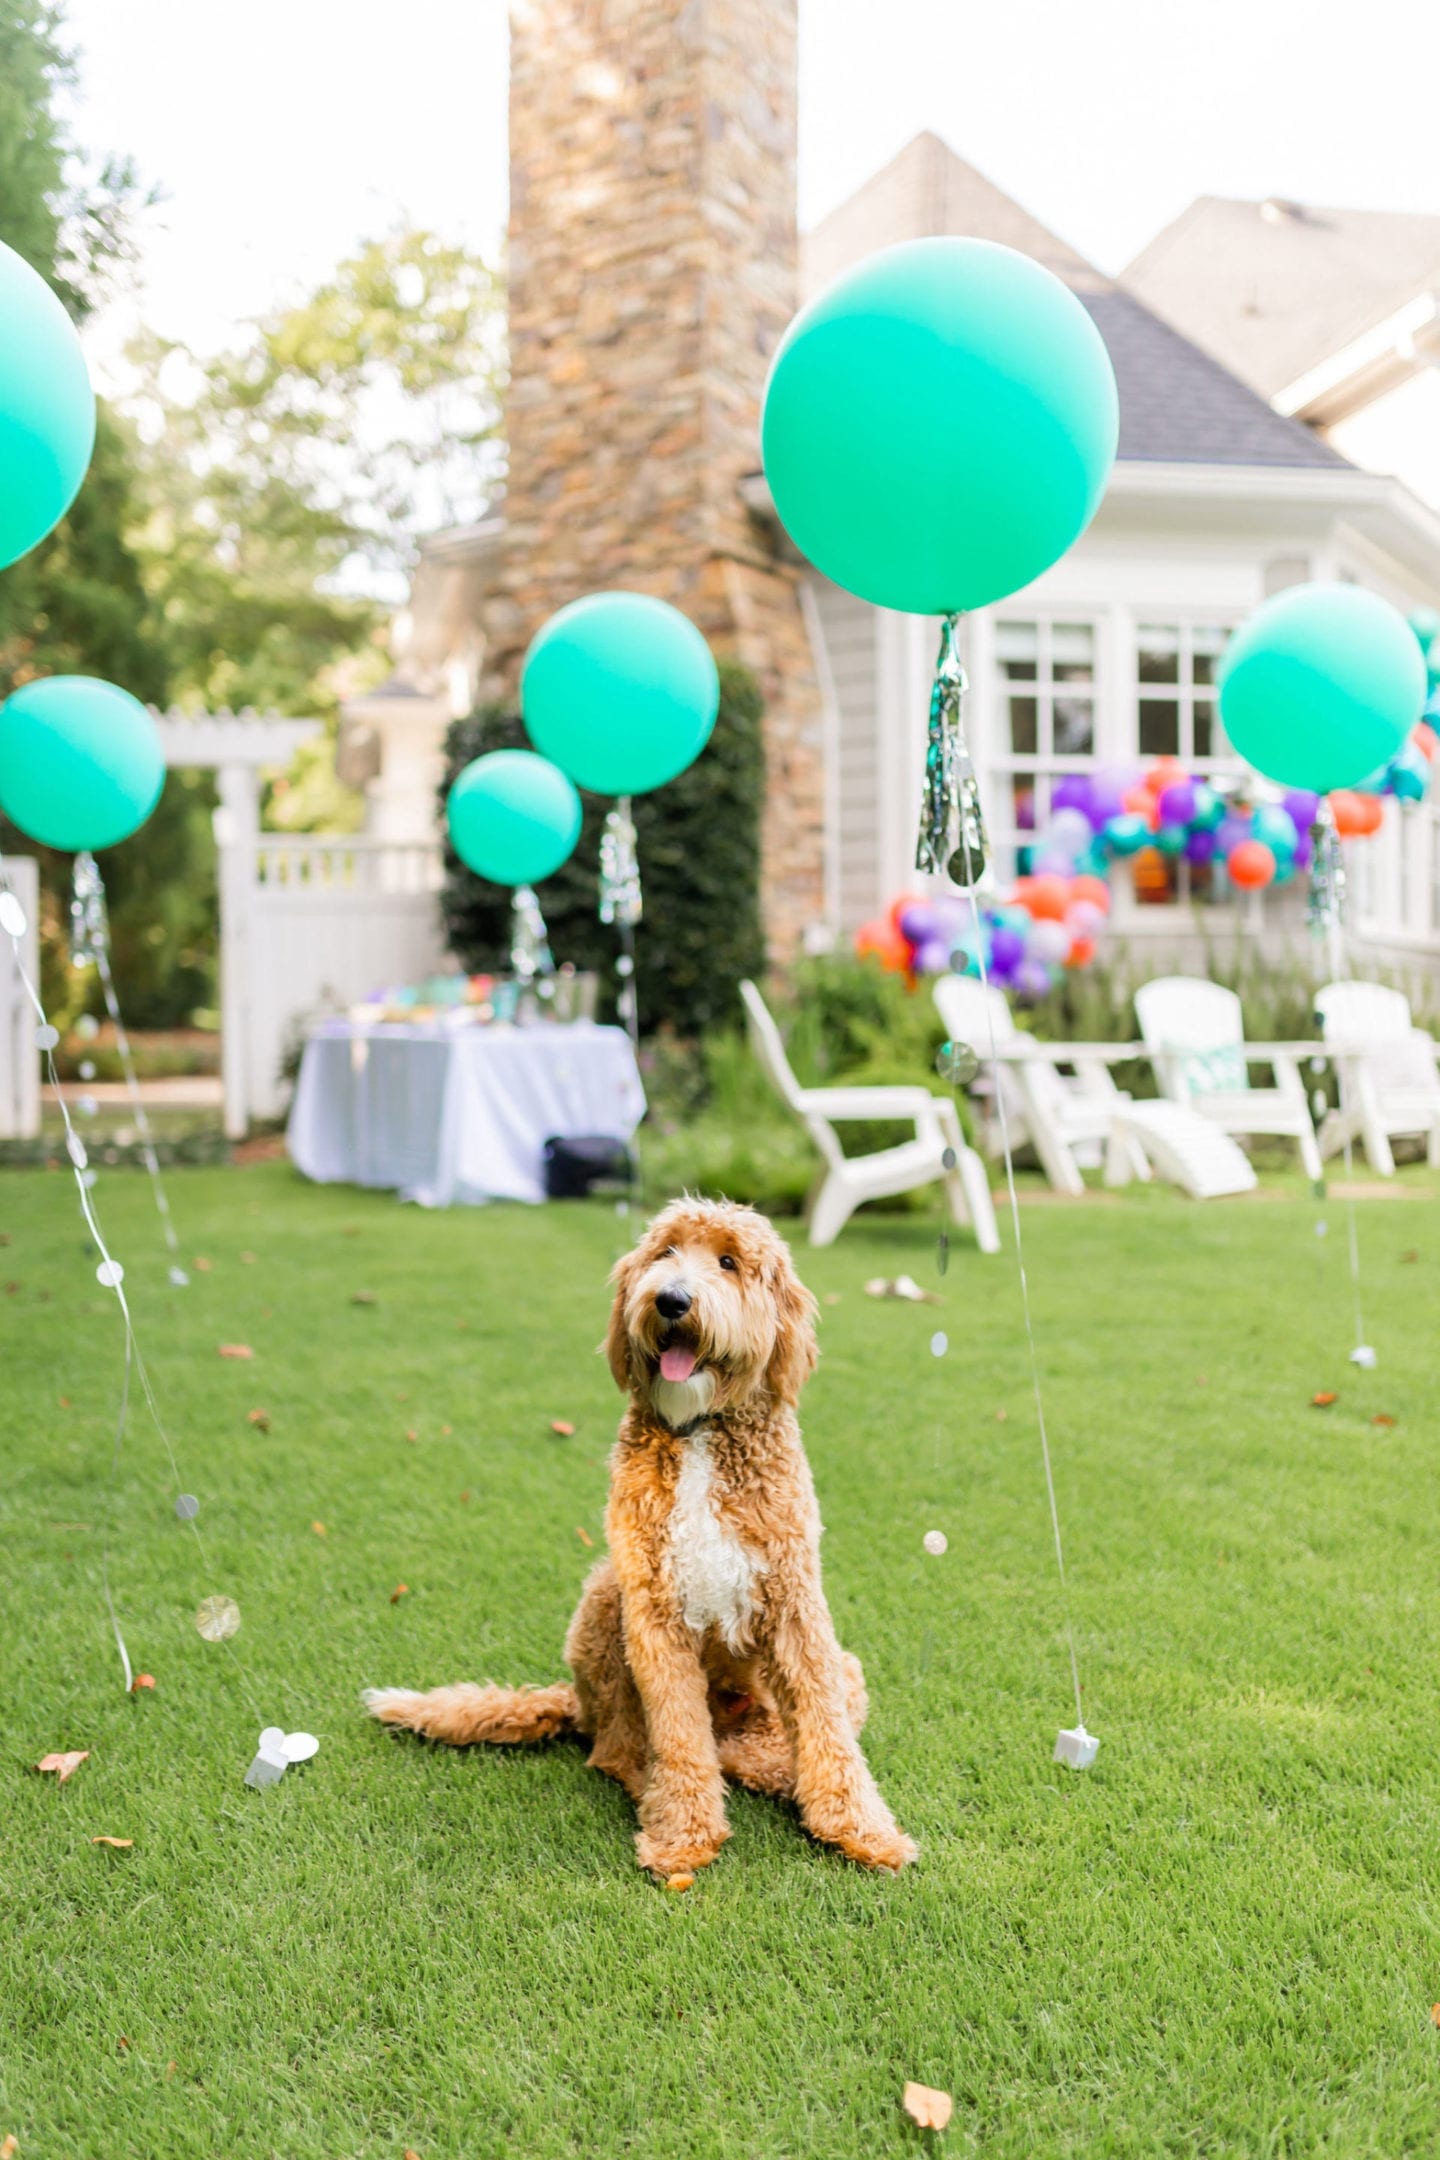 We threw a COVID surprise party for our daughter. To make it special we had awesome party balloon decorations! Sharing some fun balloon decoration ideas! I've linked everything used here for the balloon garland kit and a DIY balloon garland fun-filled party!